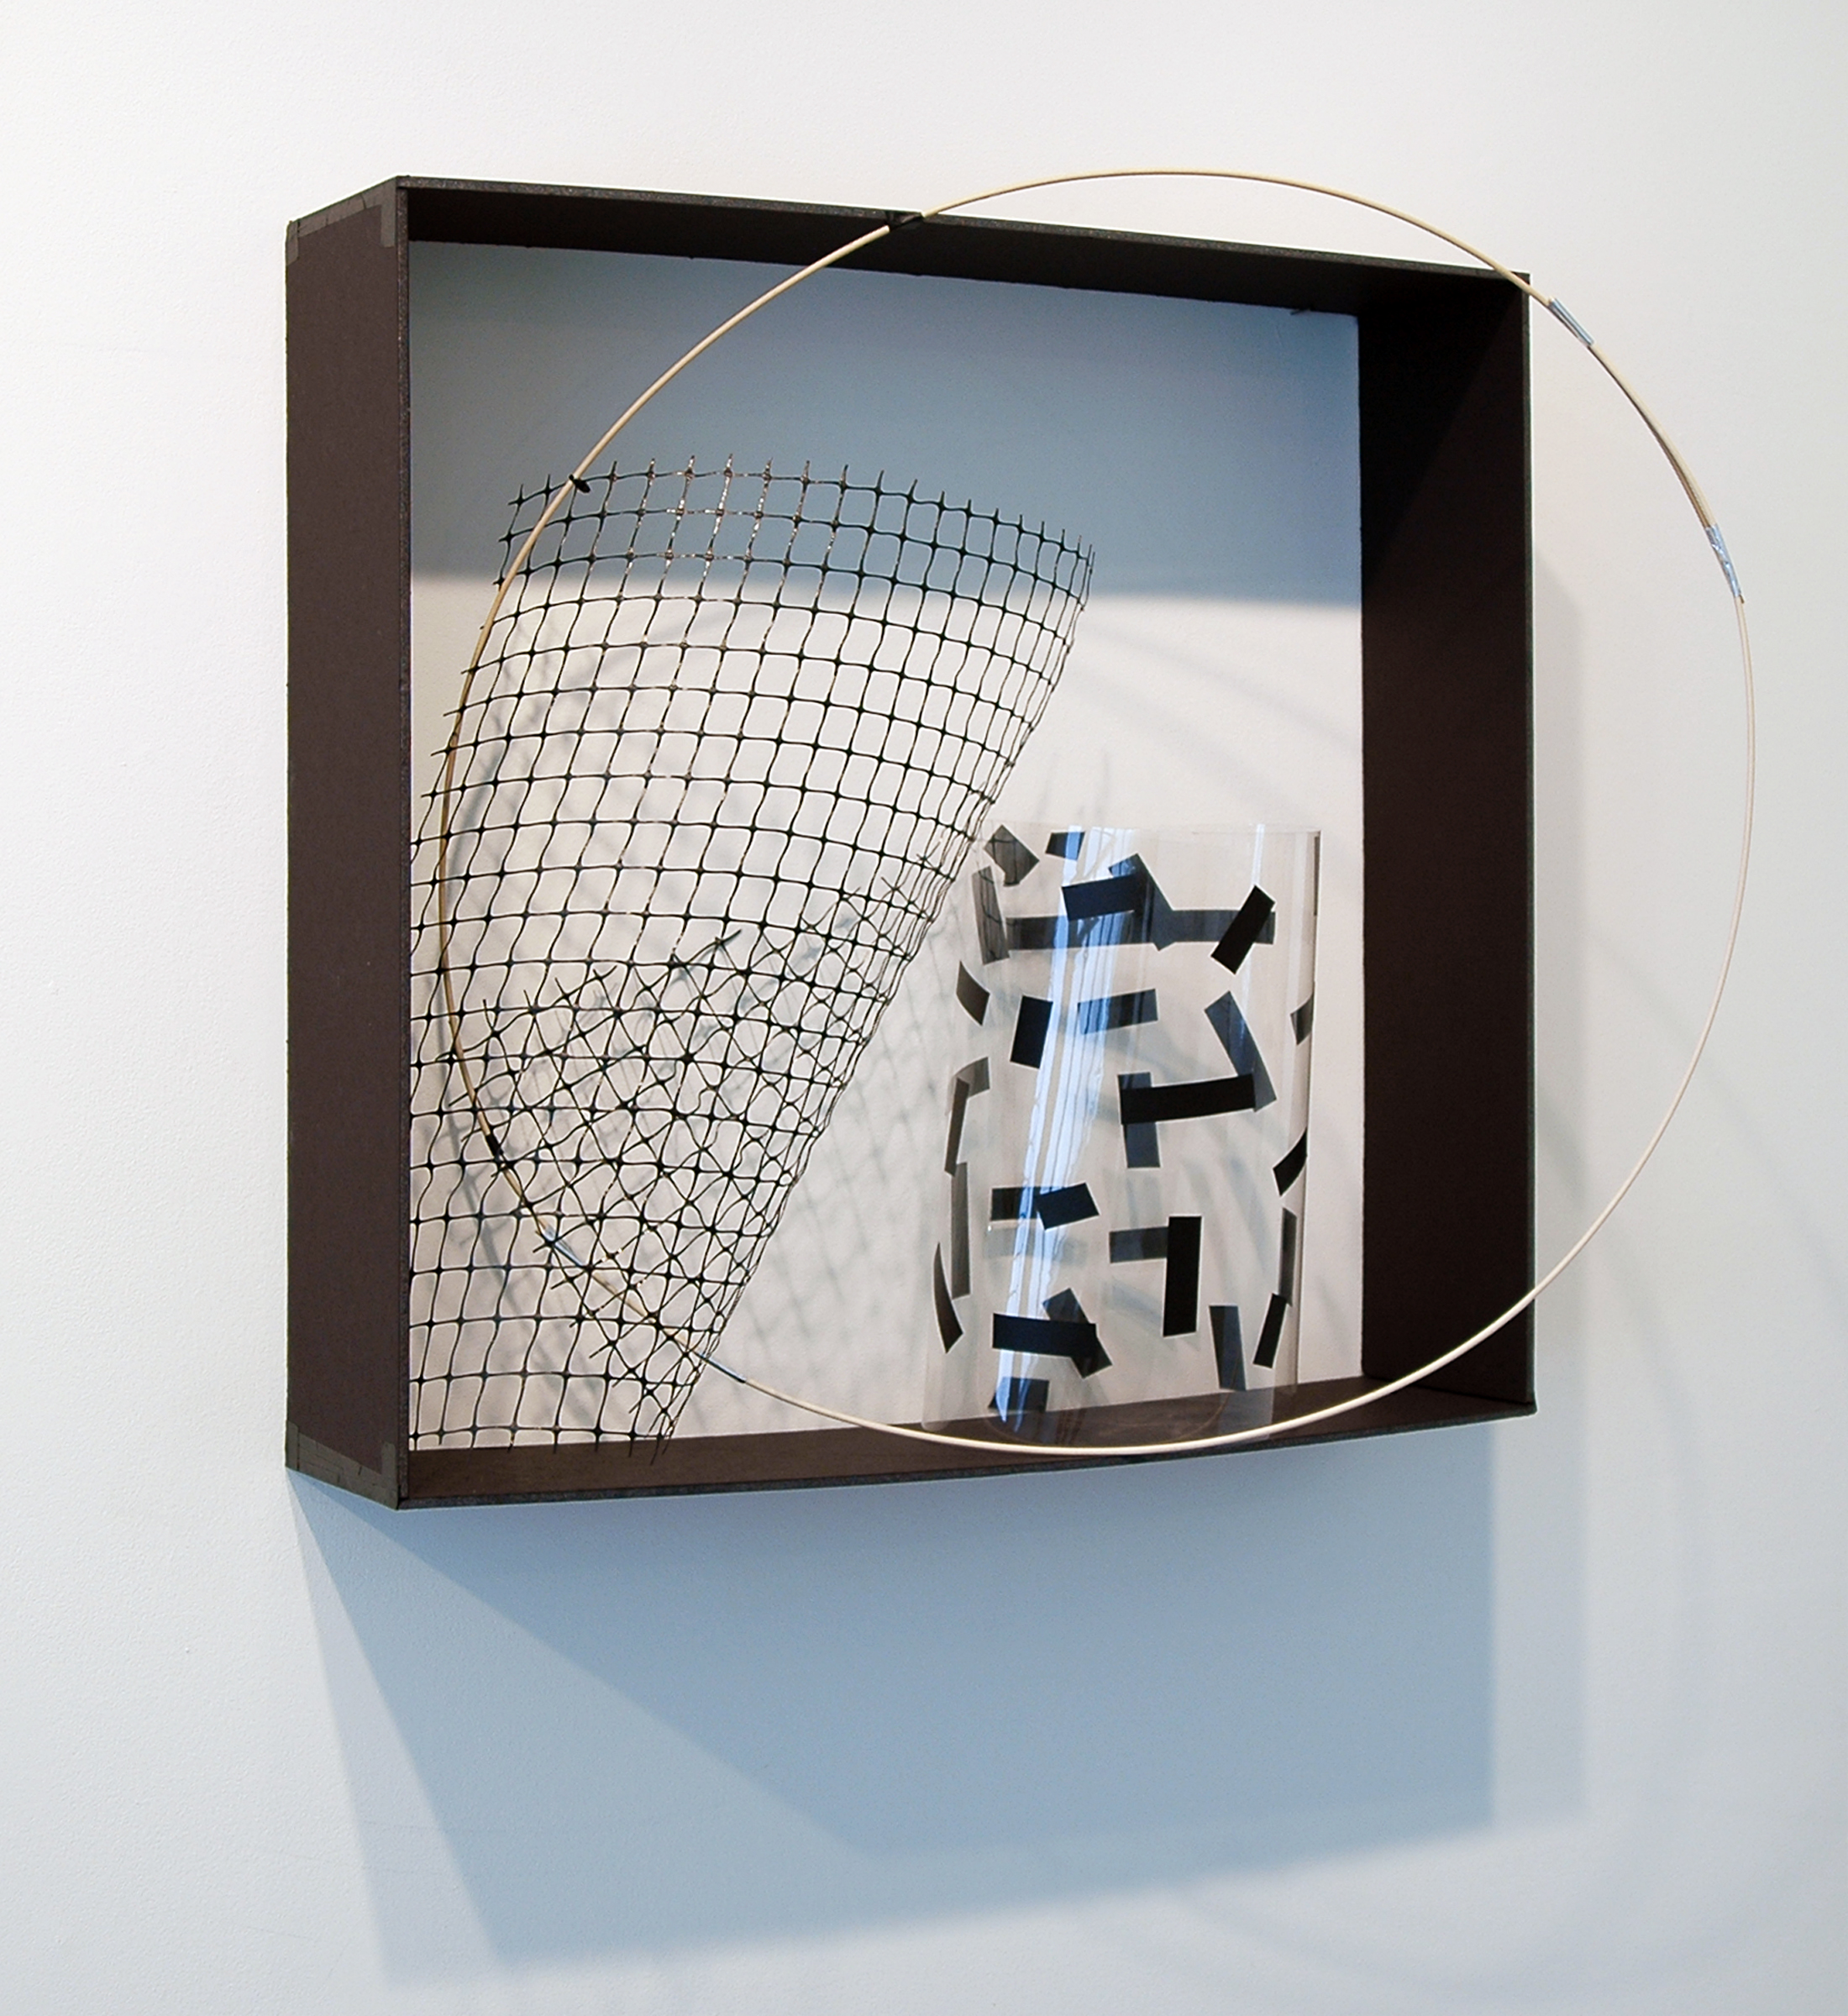   ALICE CATTANEO   The piece in the box , 2013, foam board, plastic, tape, plastic netting, balsa wood, cable ties, 25" x 24.75" x 12" 